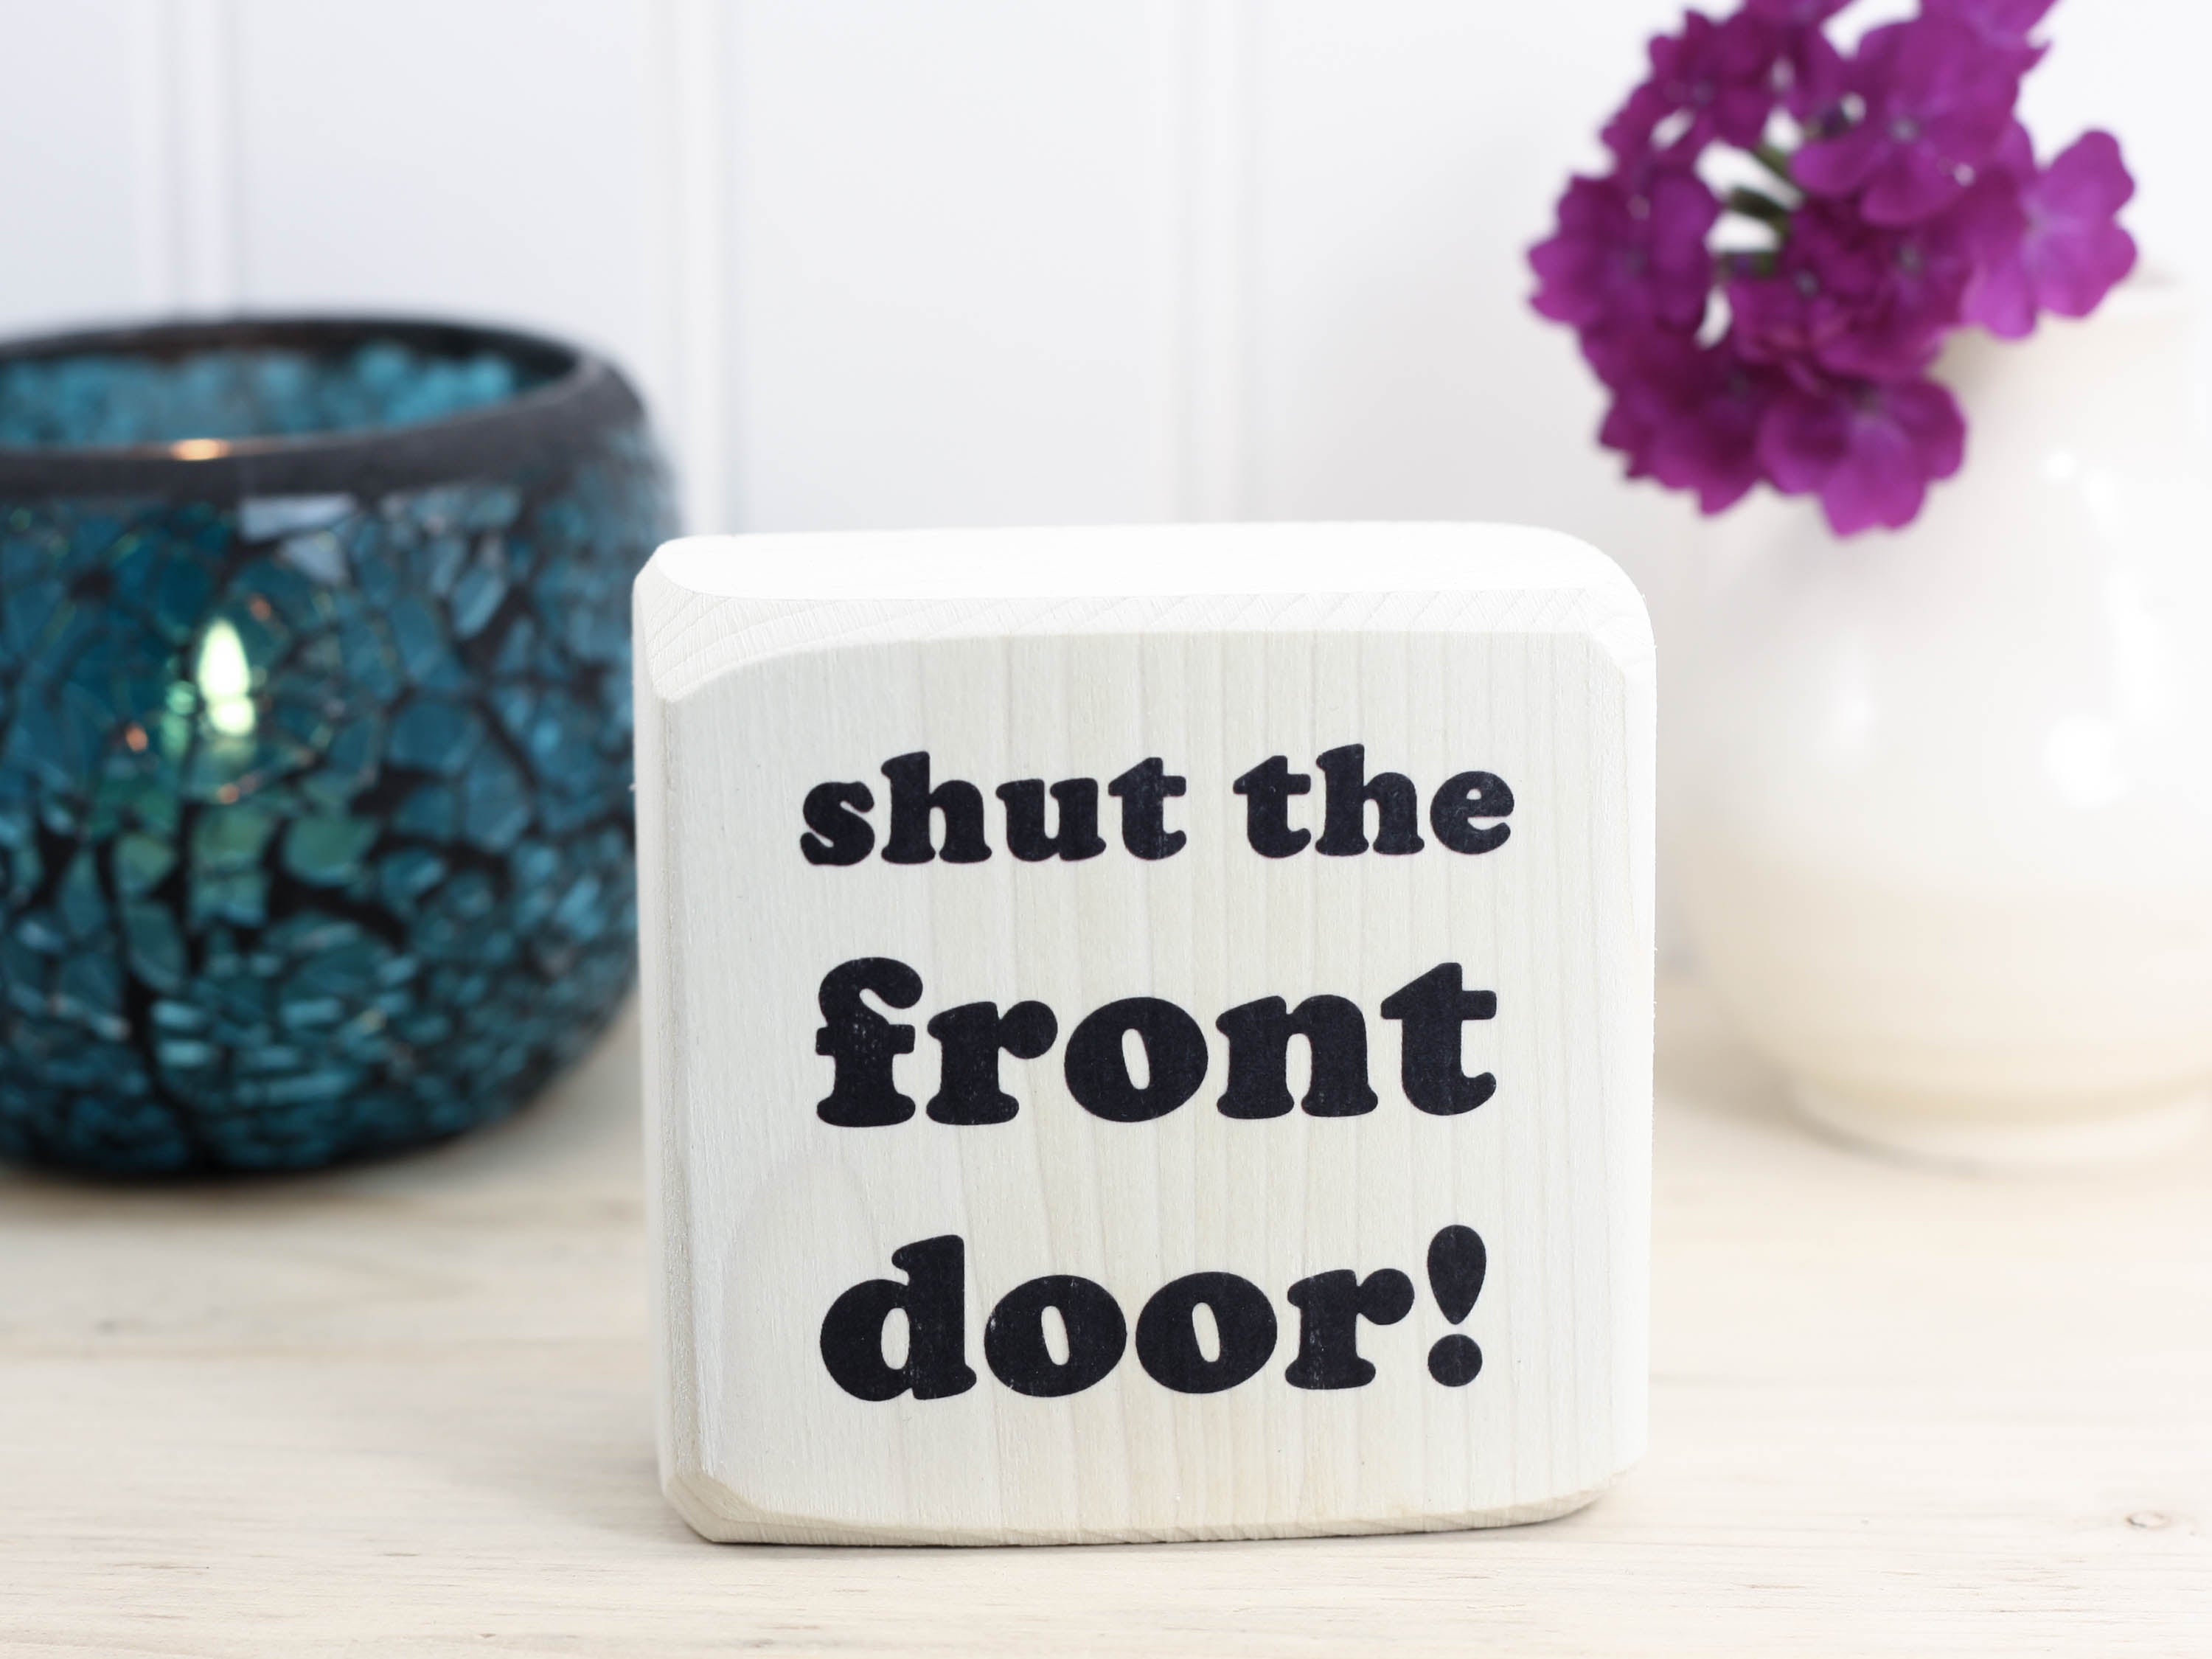 Small, freestanding, whitewashed, solid wood sign with funny saying "shut the front door!"